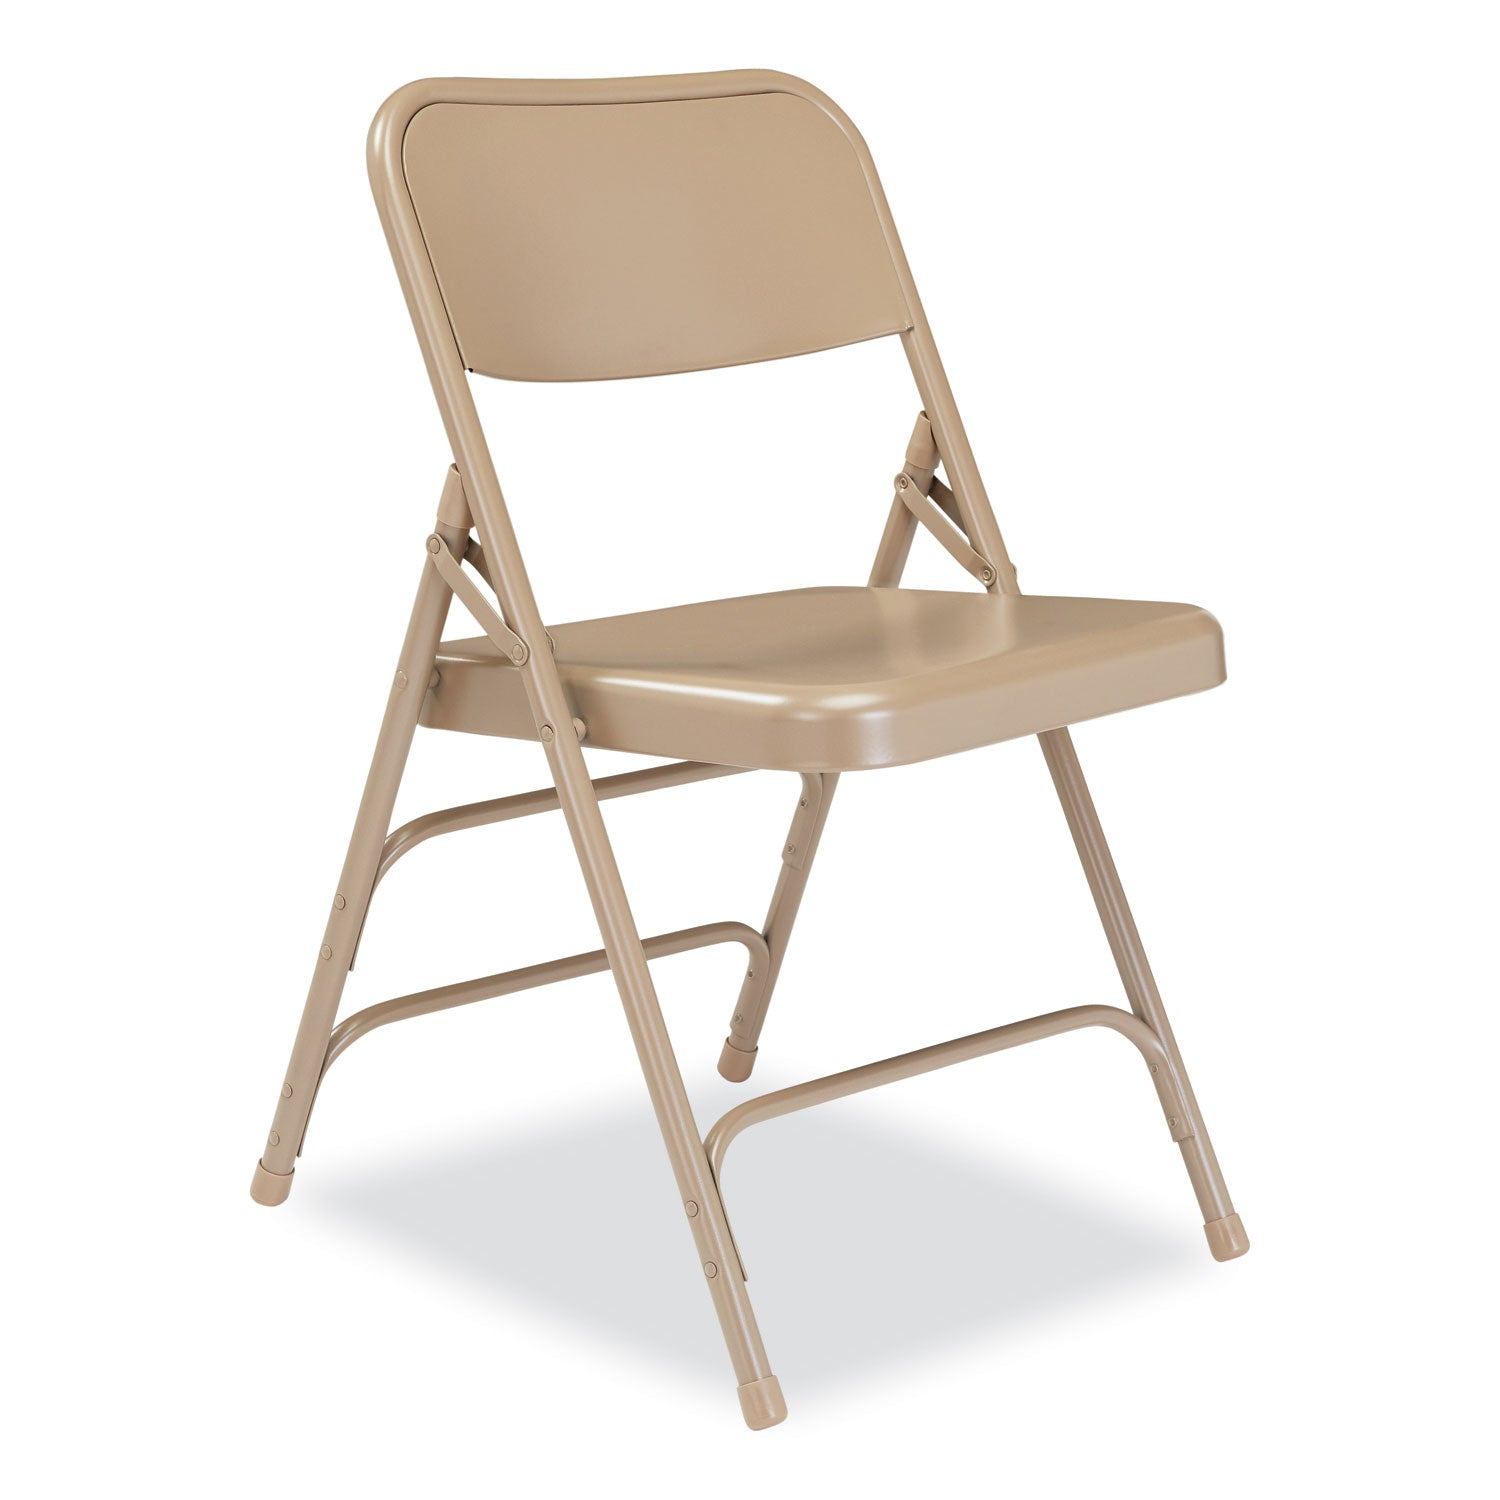 300-series-deluxe-all-steel-triple-brace-folding-chair-supports-480-lb-1725-seat-ht-beige-4-ct-ships-in-1-3-bus-days_nps301 - 2